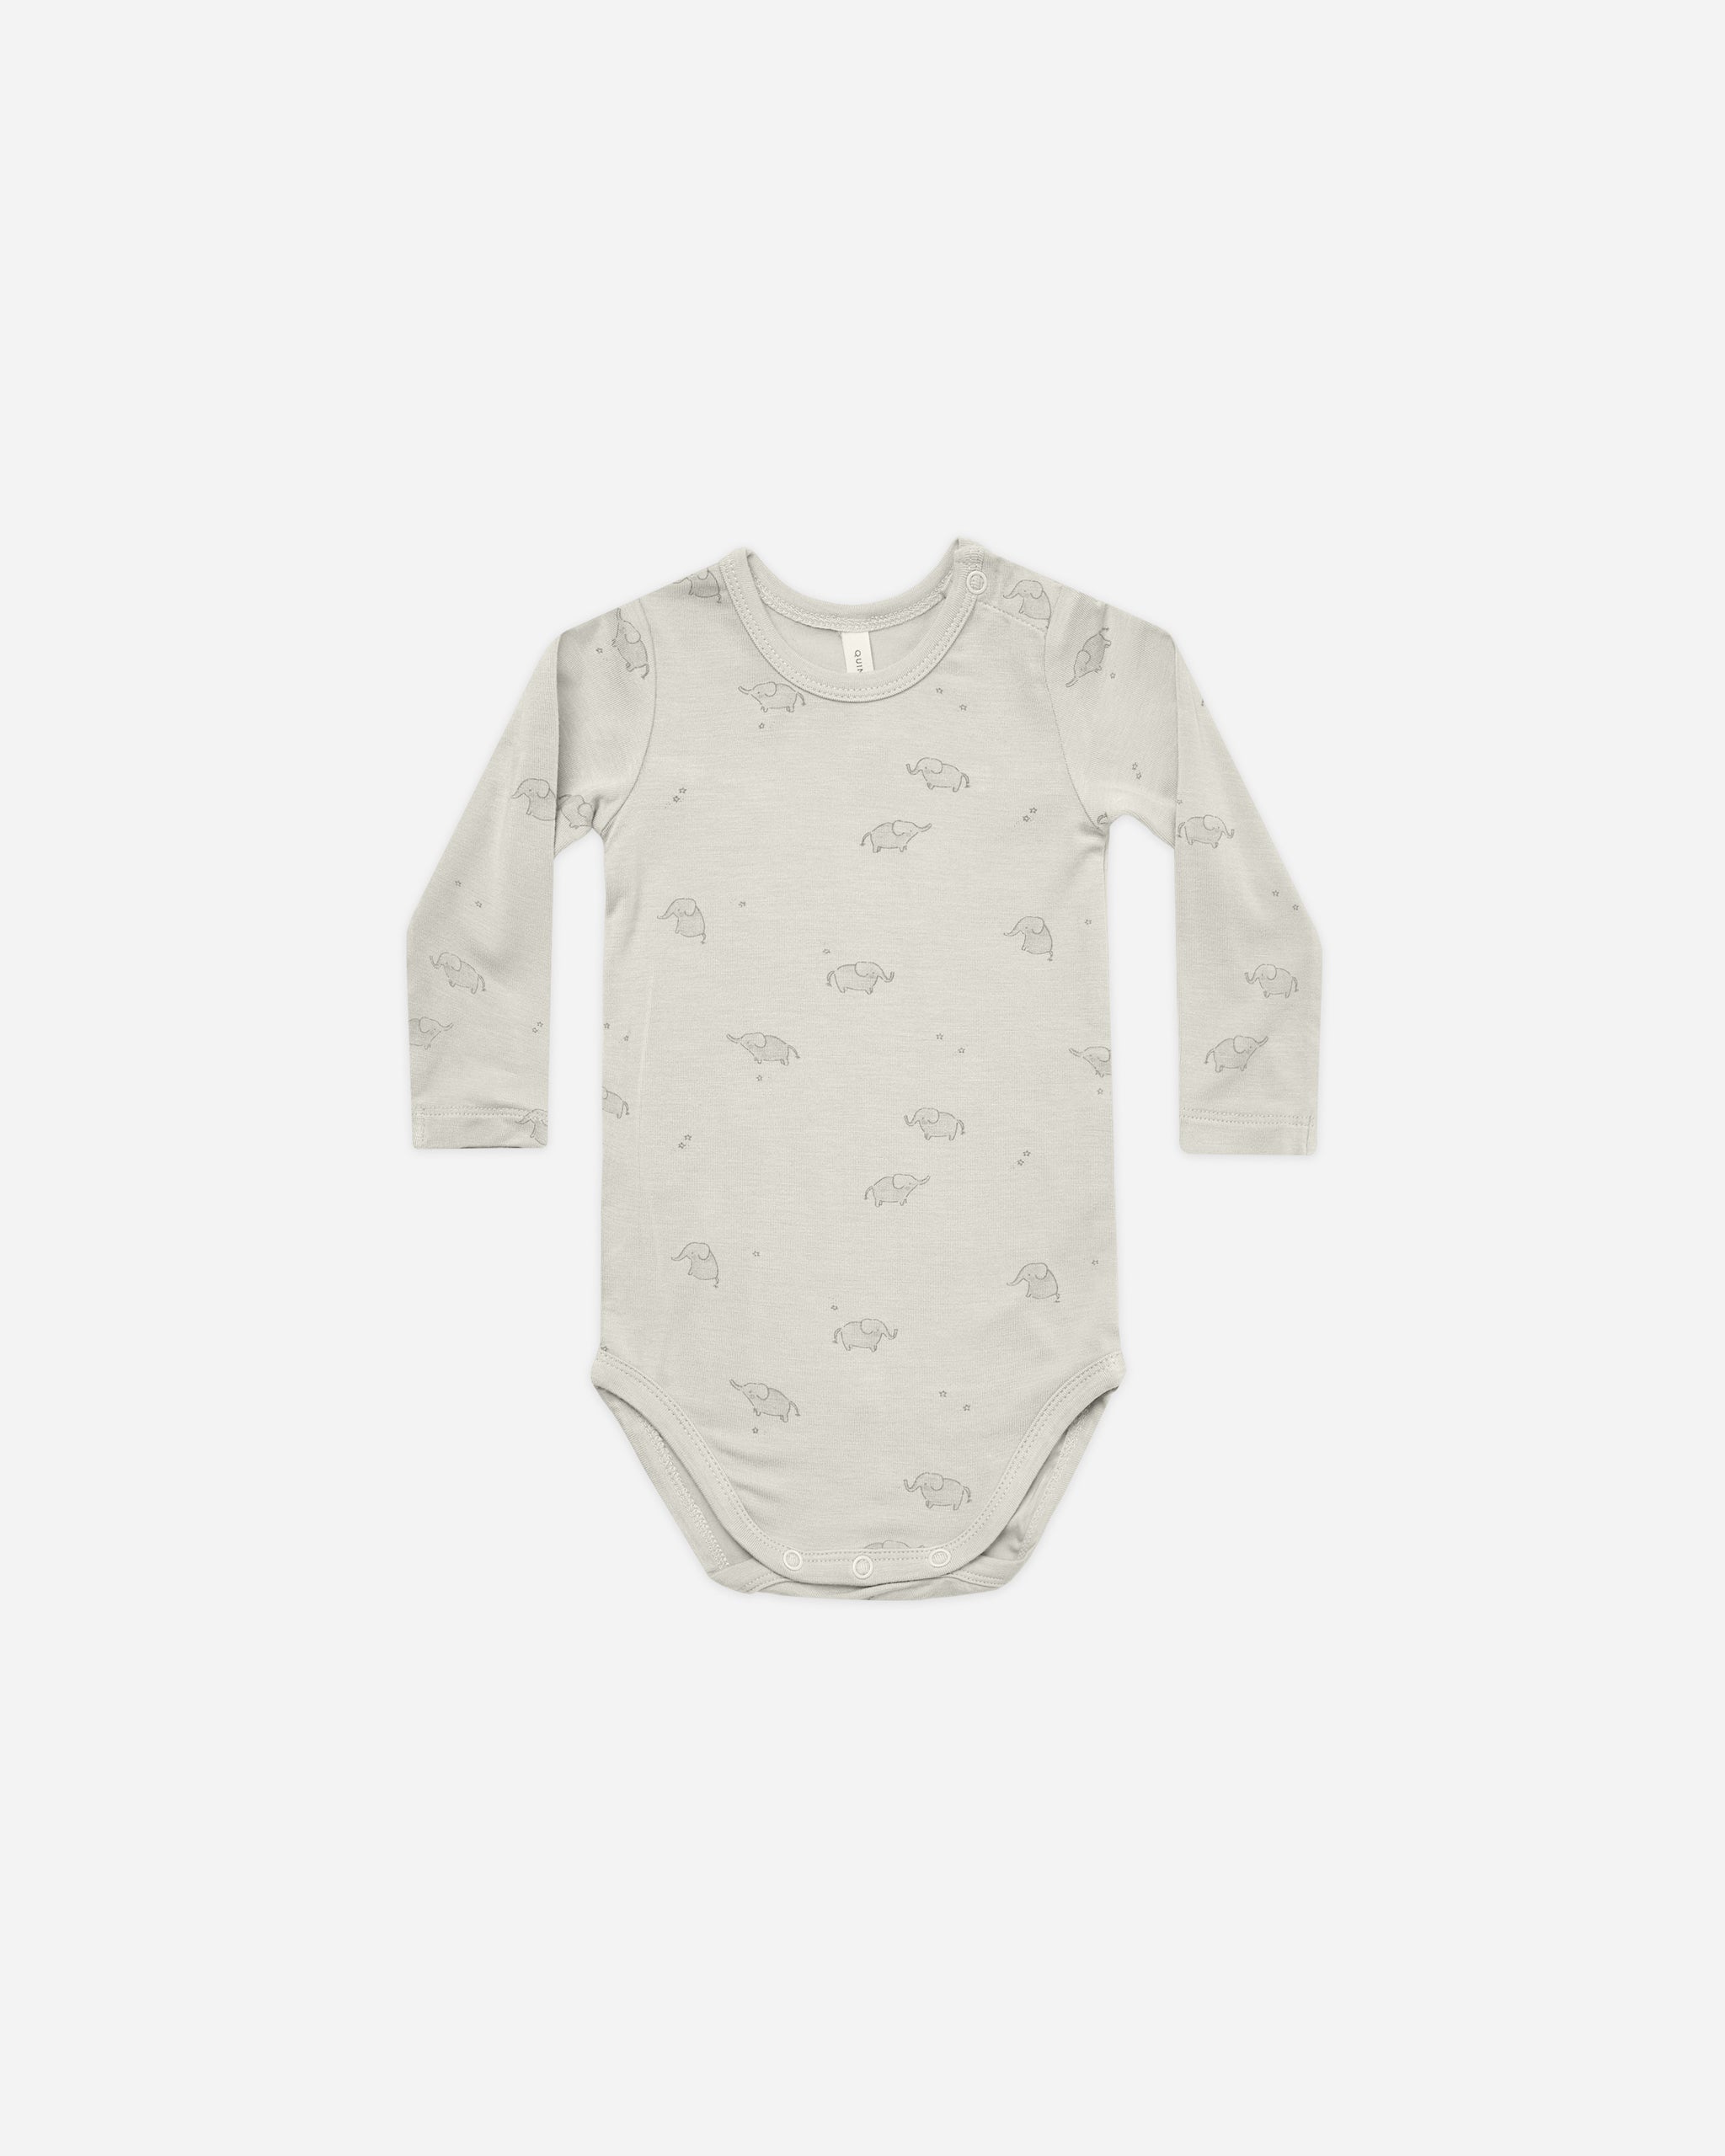 Bamboo Long Sleeve Bodysuit || Elephants - Rylee + Cru | Kids Clothes | Trendy Baby Clothes | Modern Infant Outfits |